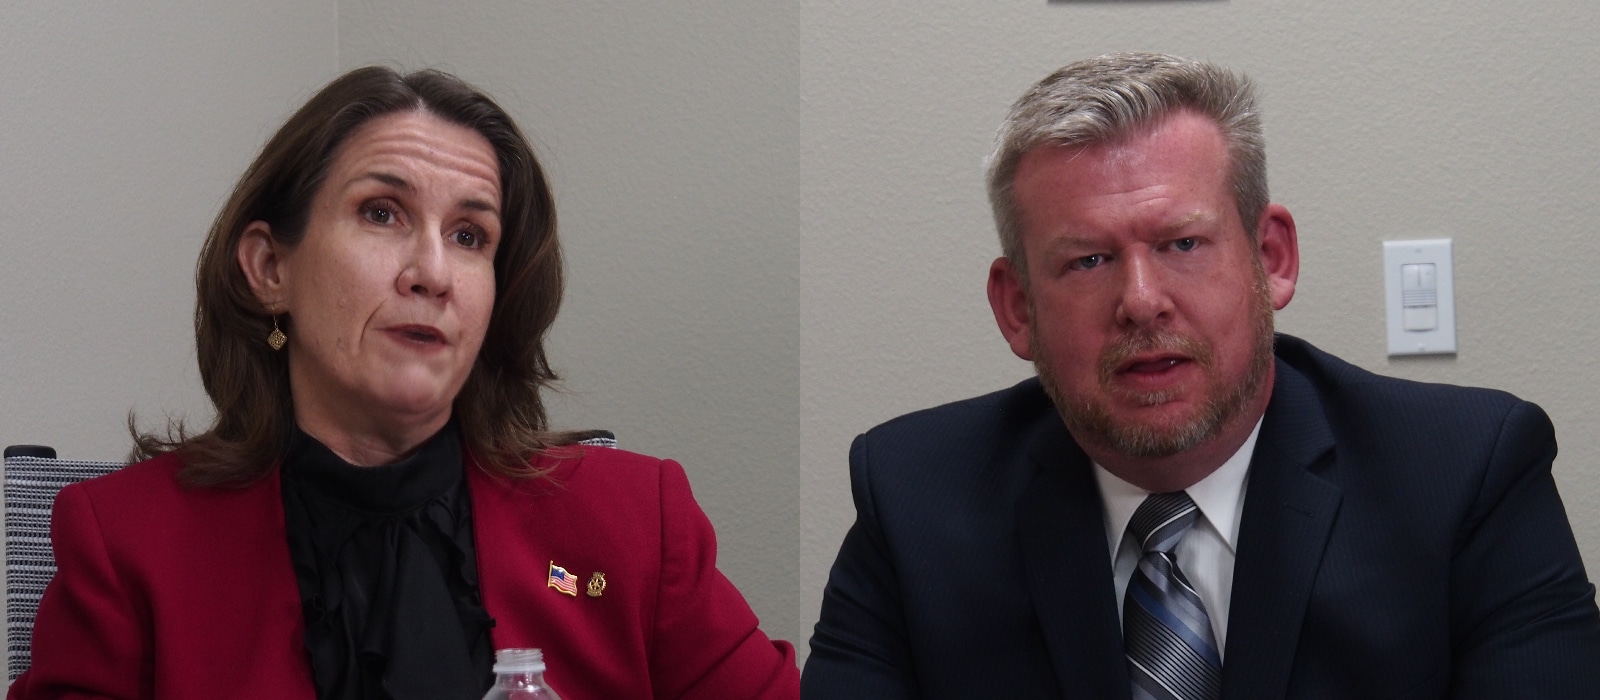 VIDEO: Riverside County judicial candidate forum